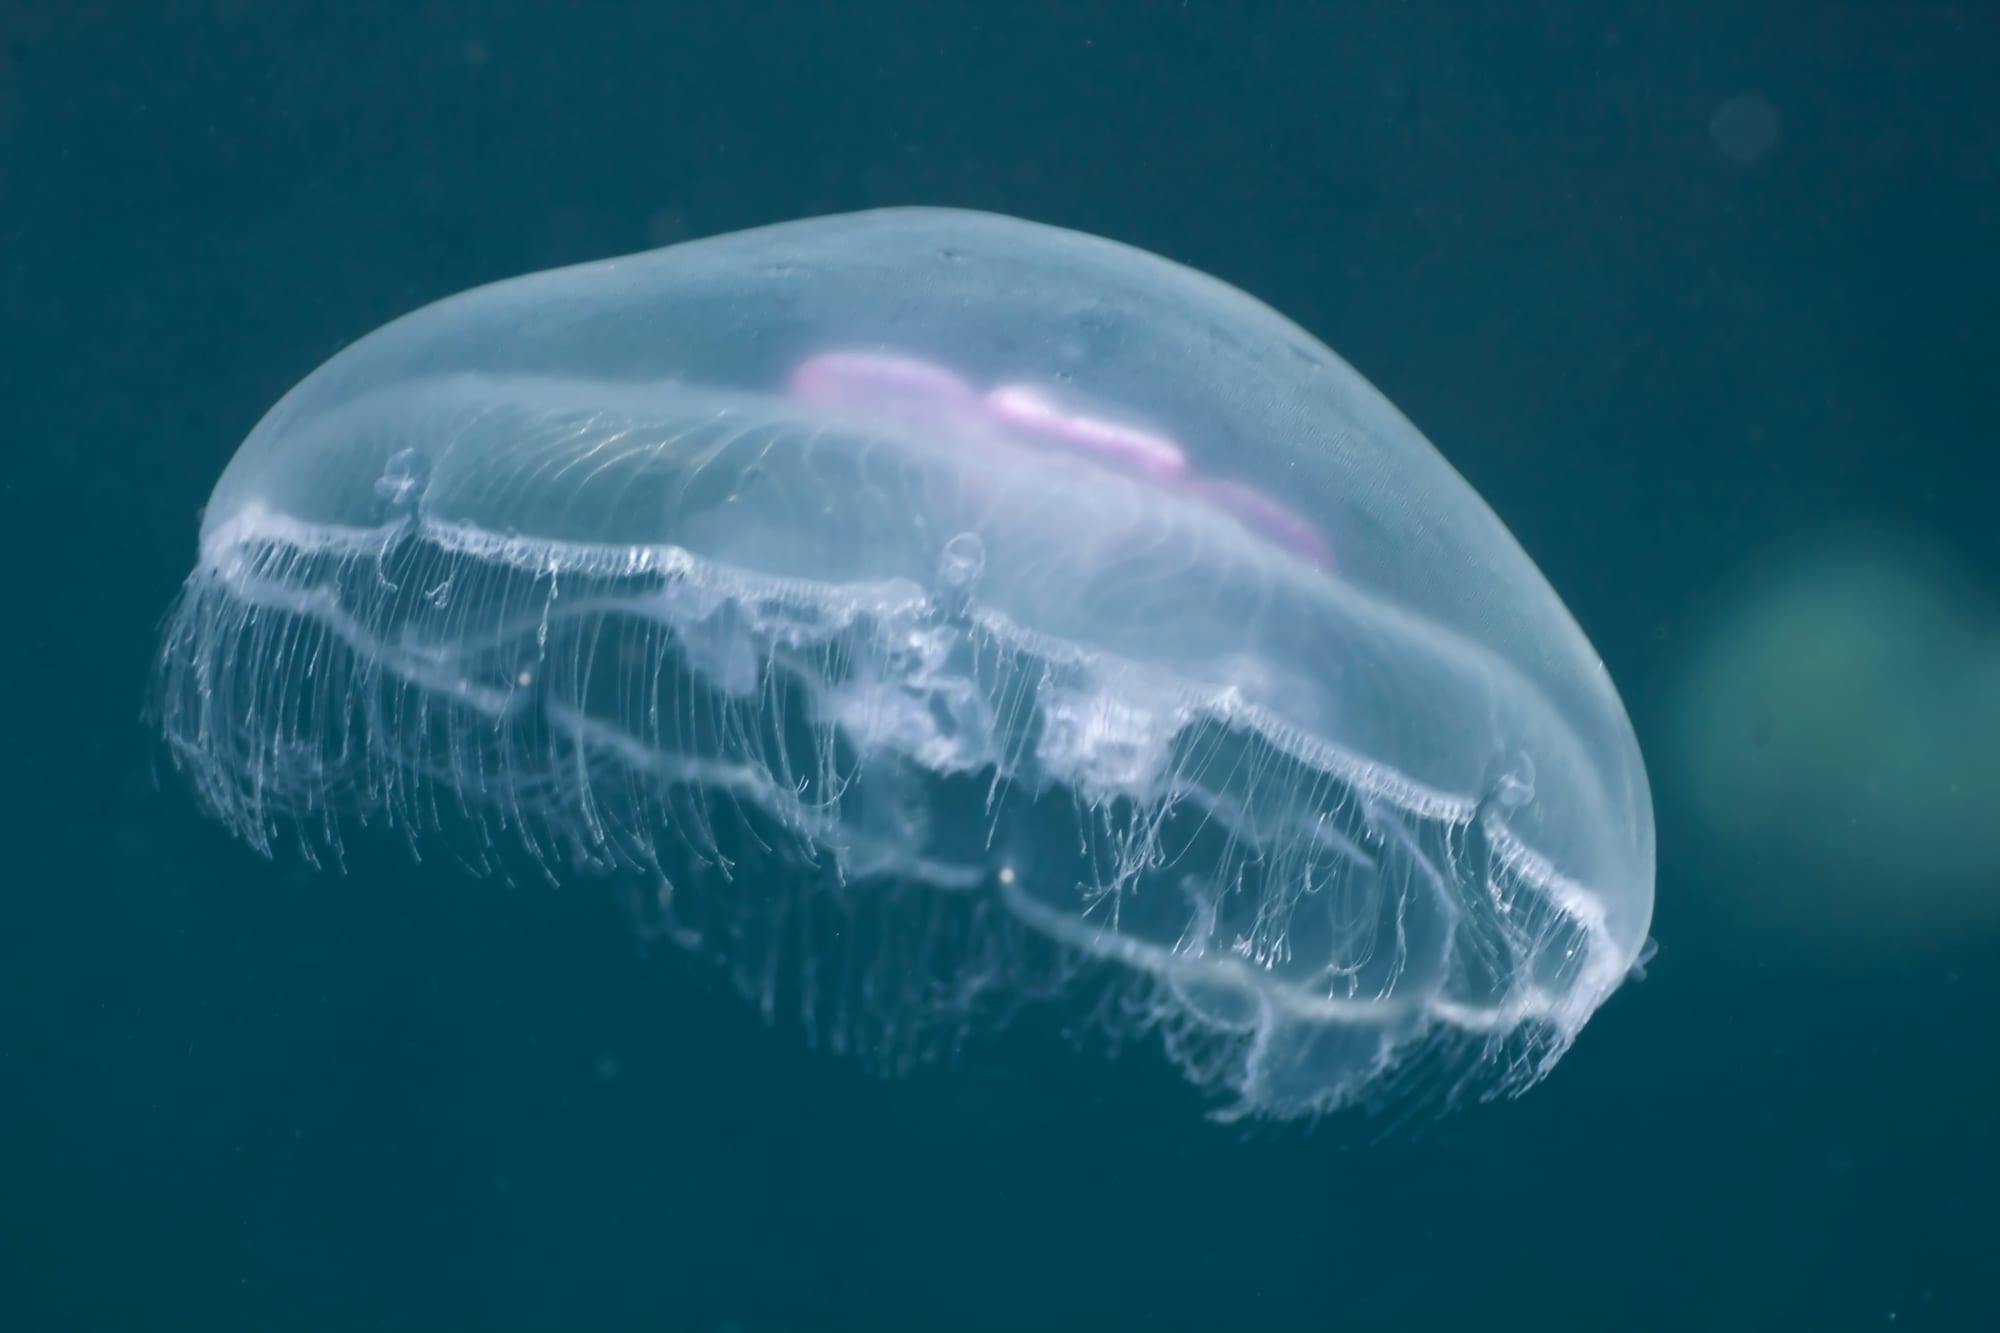 Sample picture of a jellyfish.